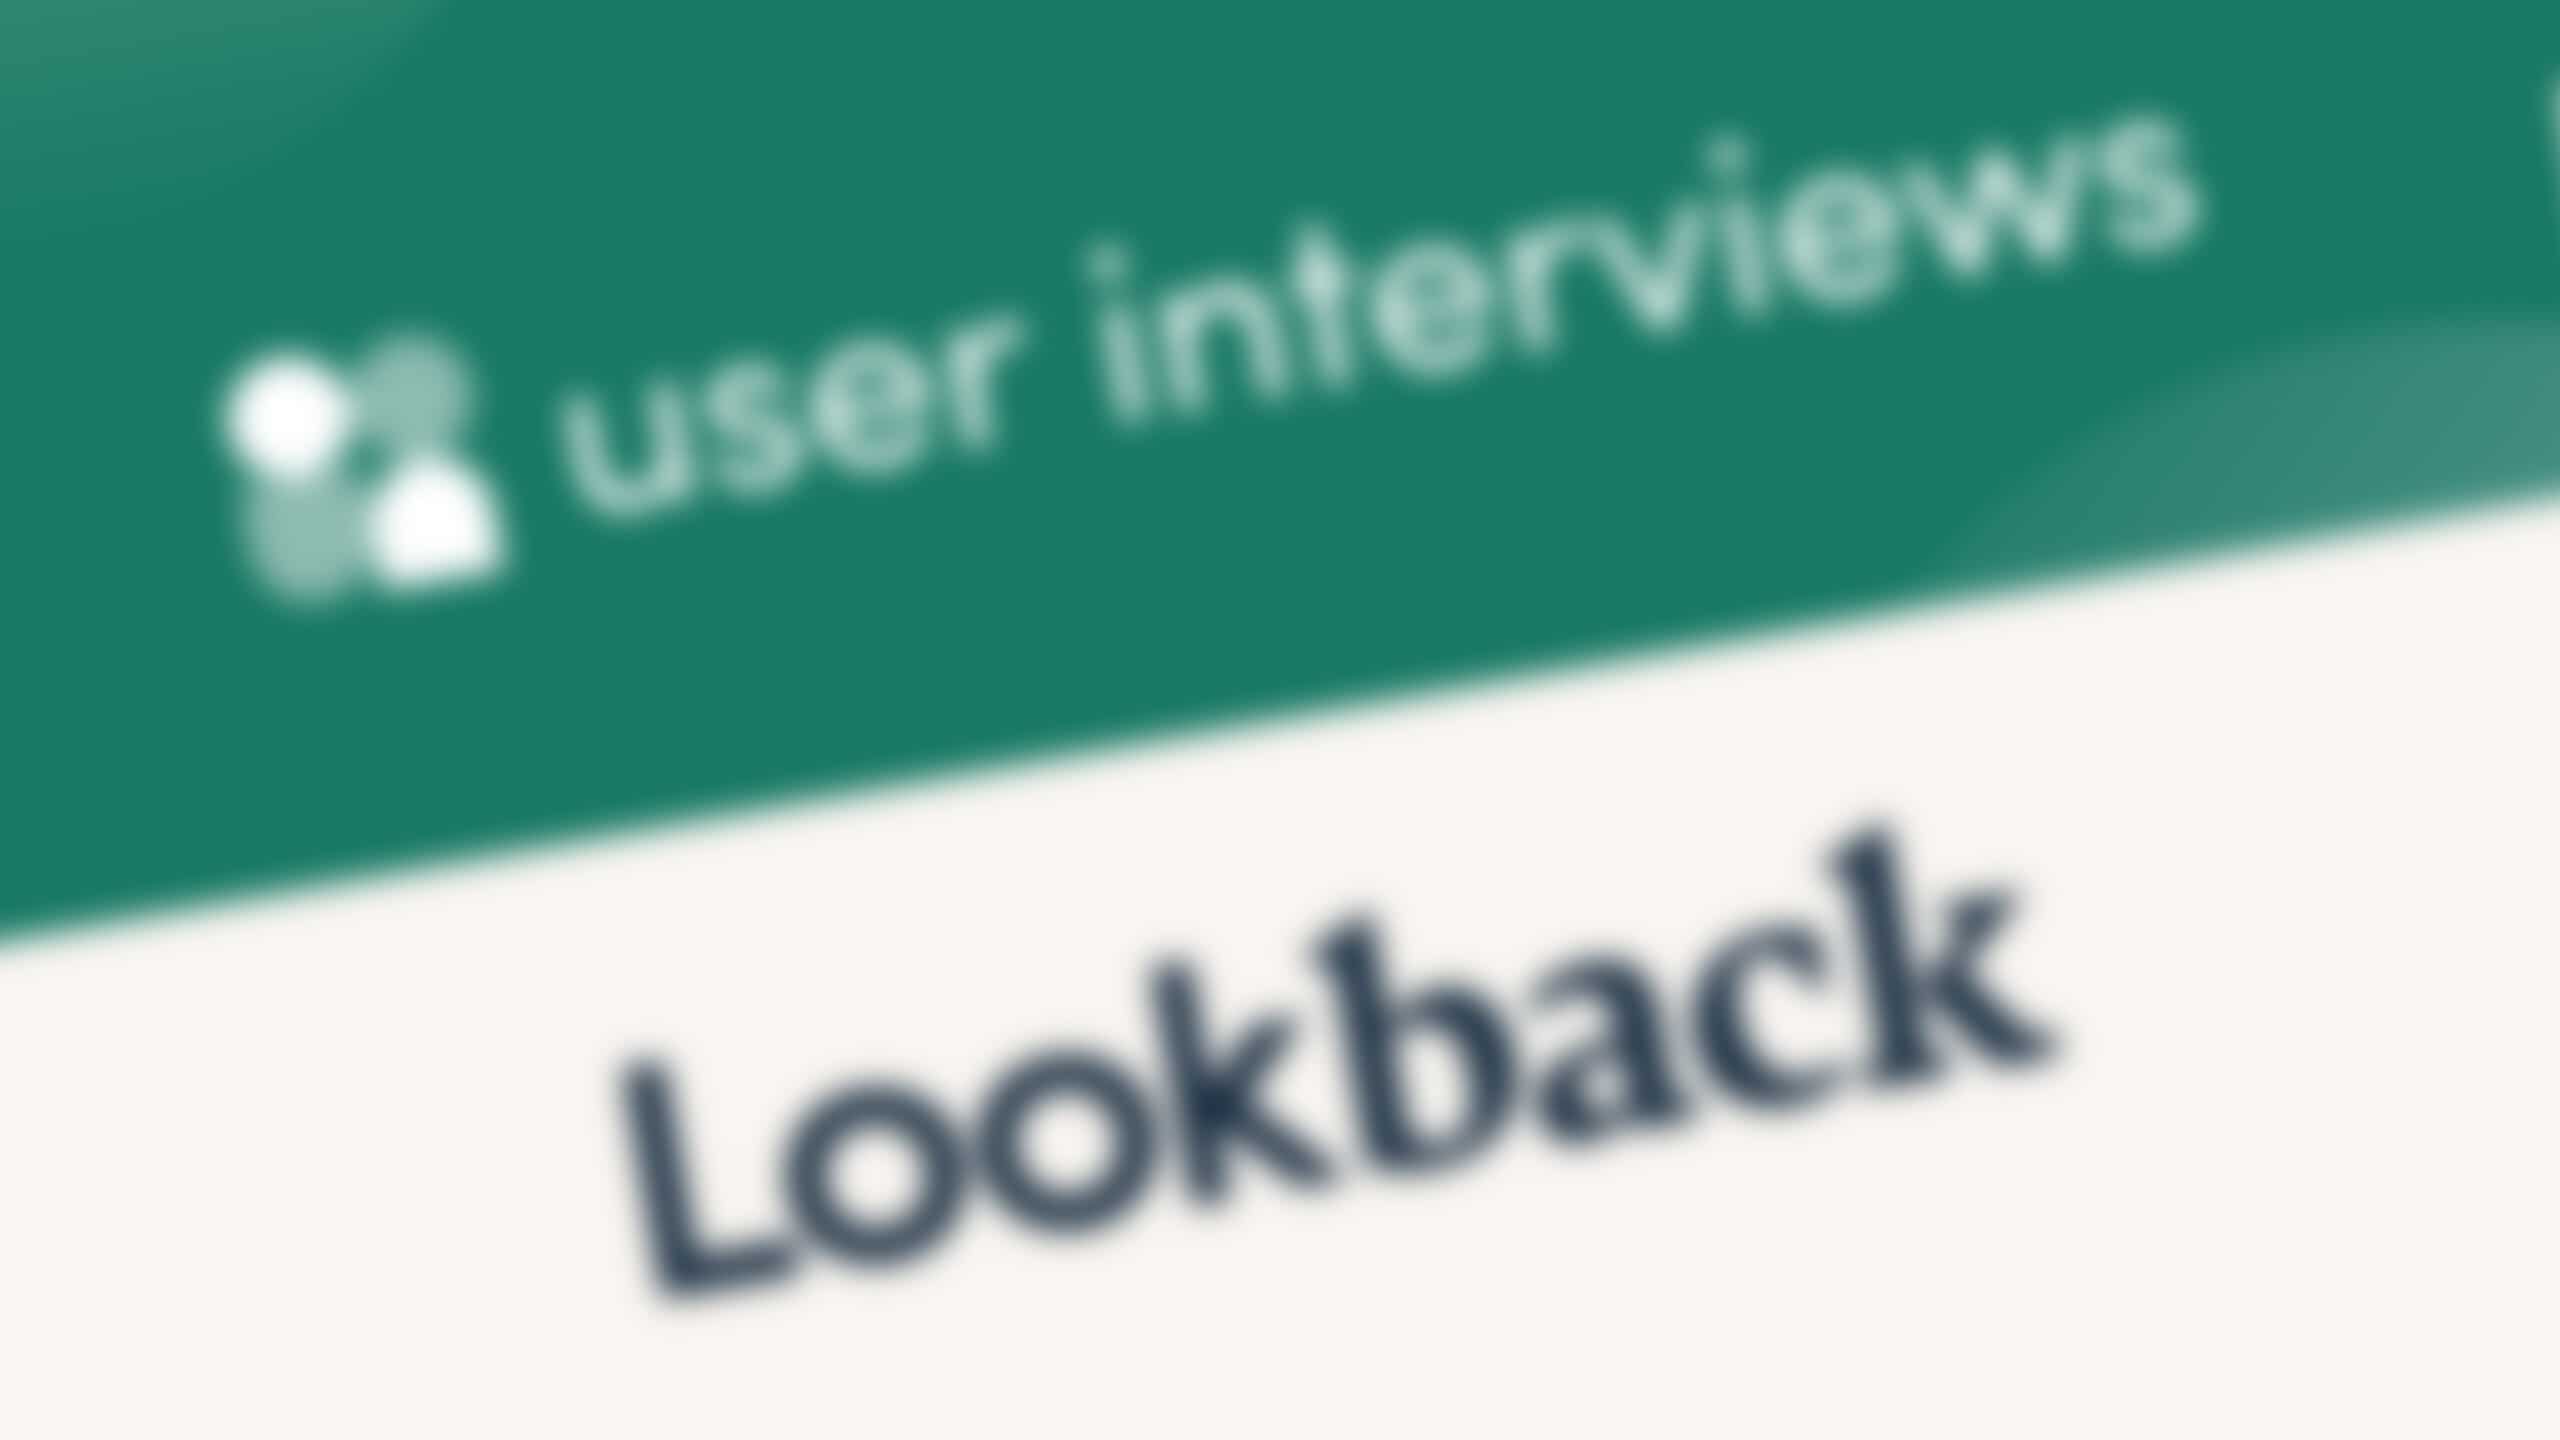 User Interviews and LoopBack.io logs inclined and blurred